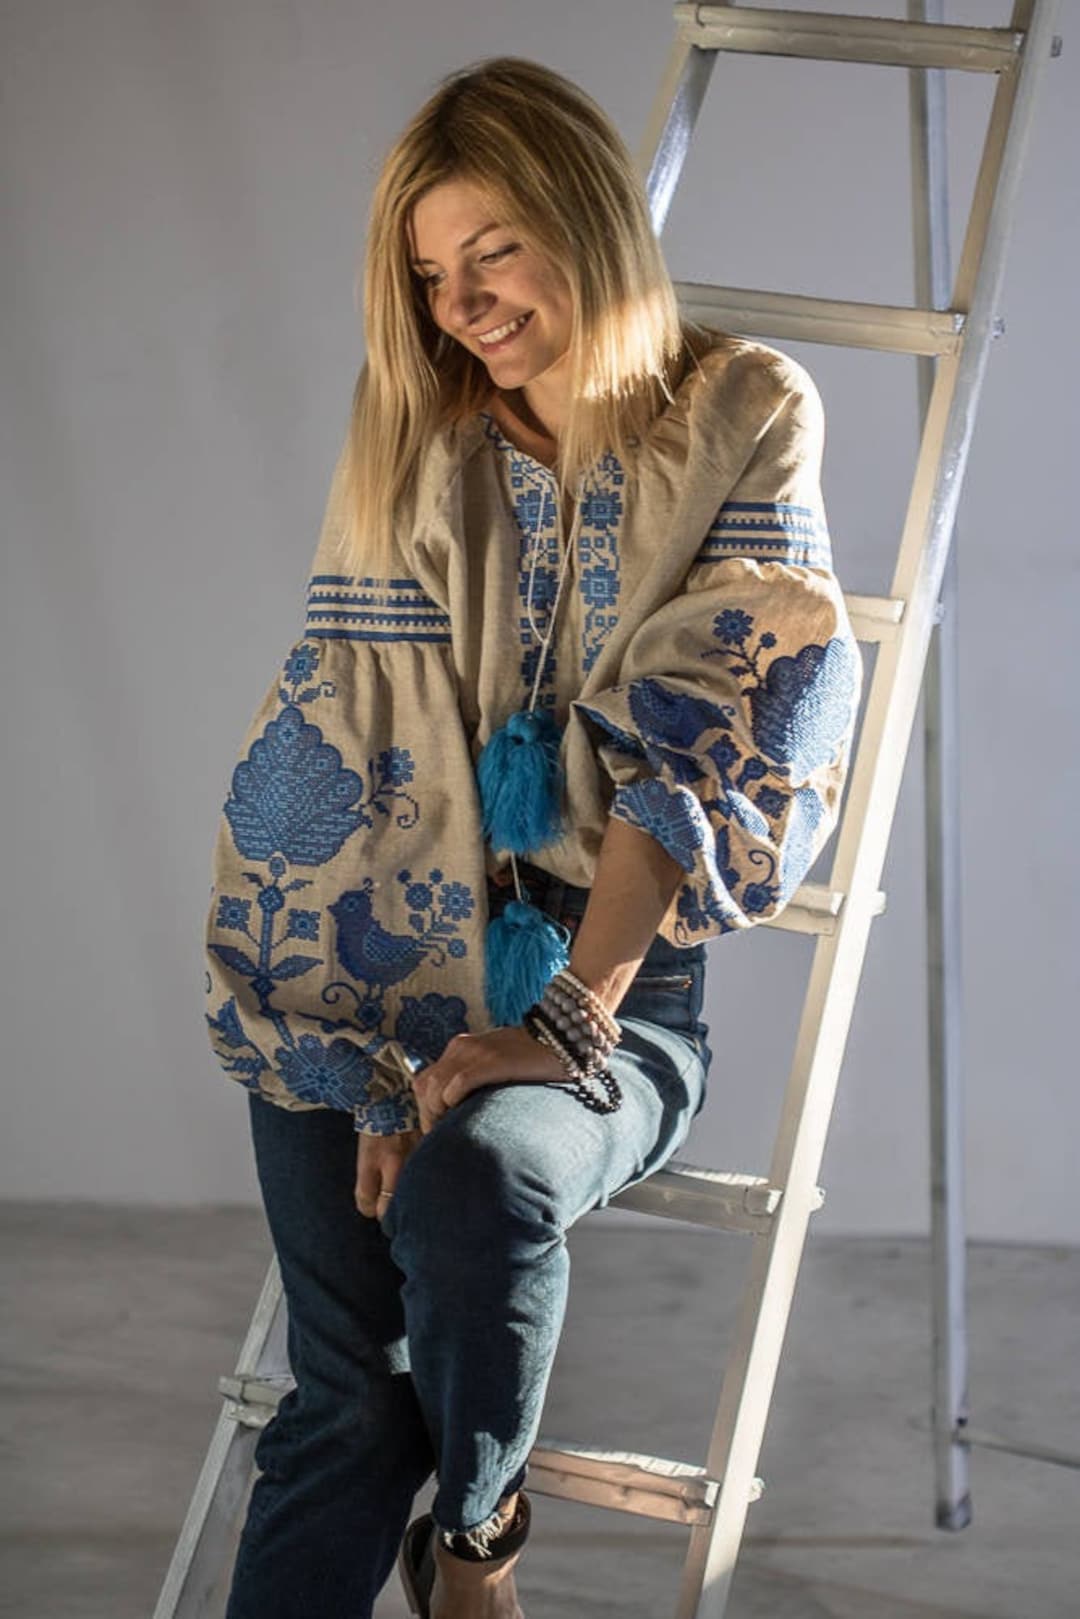 Linen Embroidered Top in Boho Style, Dressy Linen Long Sleeve Top